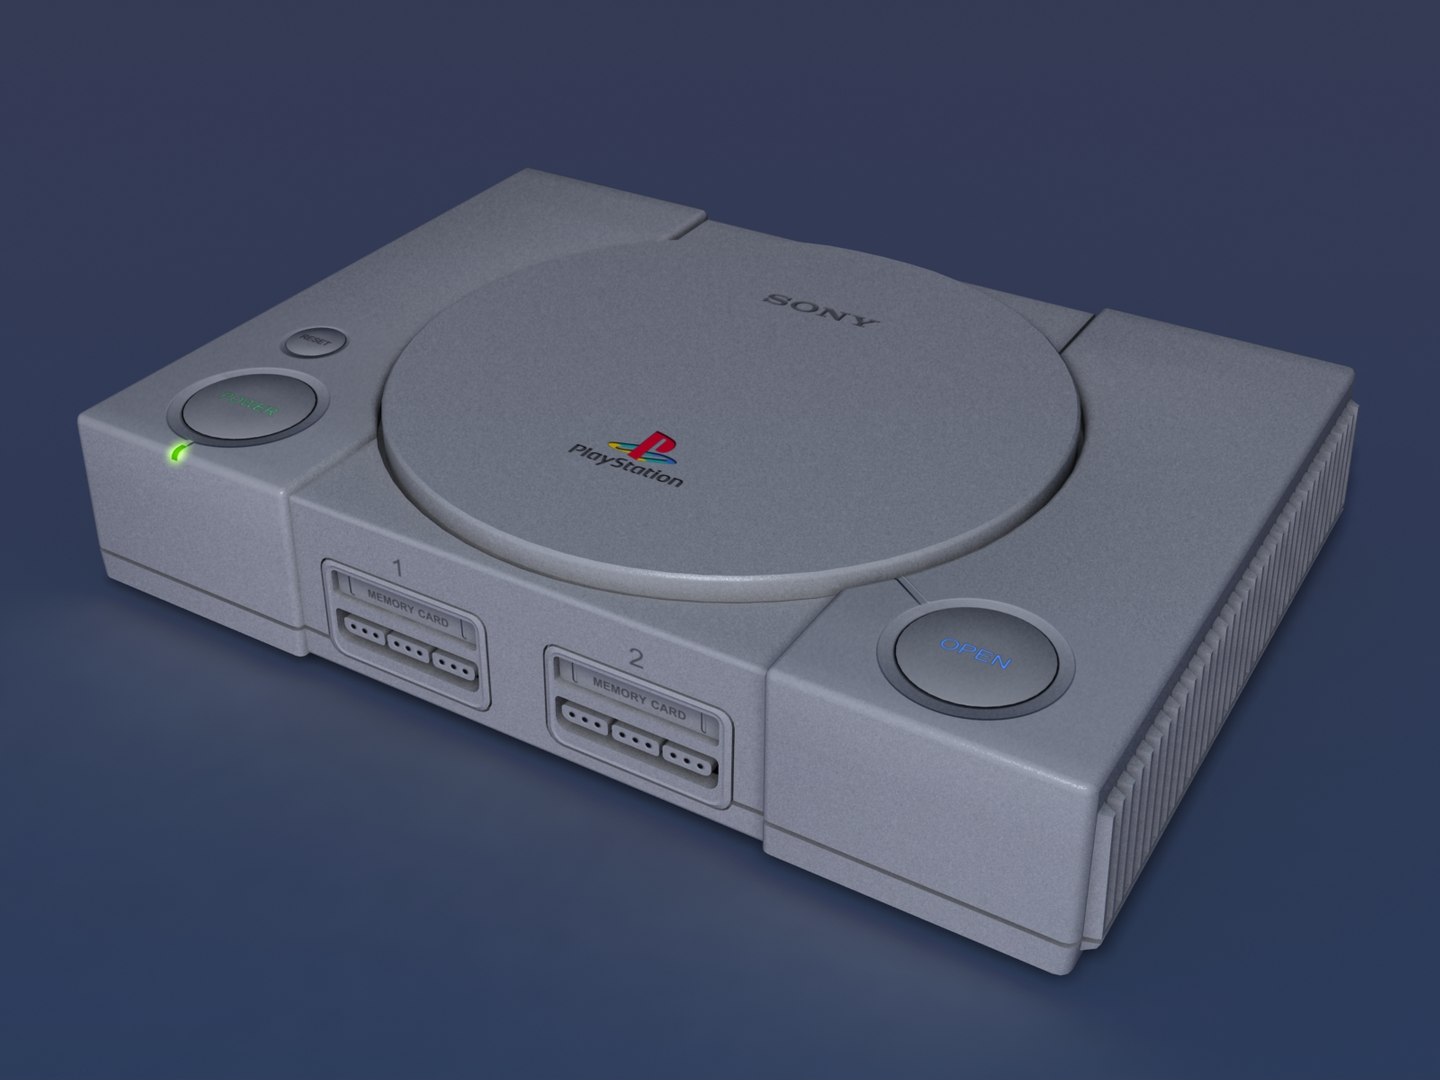 Sony playstation когда вышла. Sony PLAYSTATION ps1. Sony PLAYSTATION 1 1994. Ps1 SCPH 5903. Sony ps1 1994.